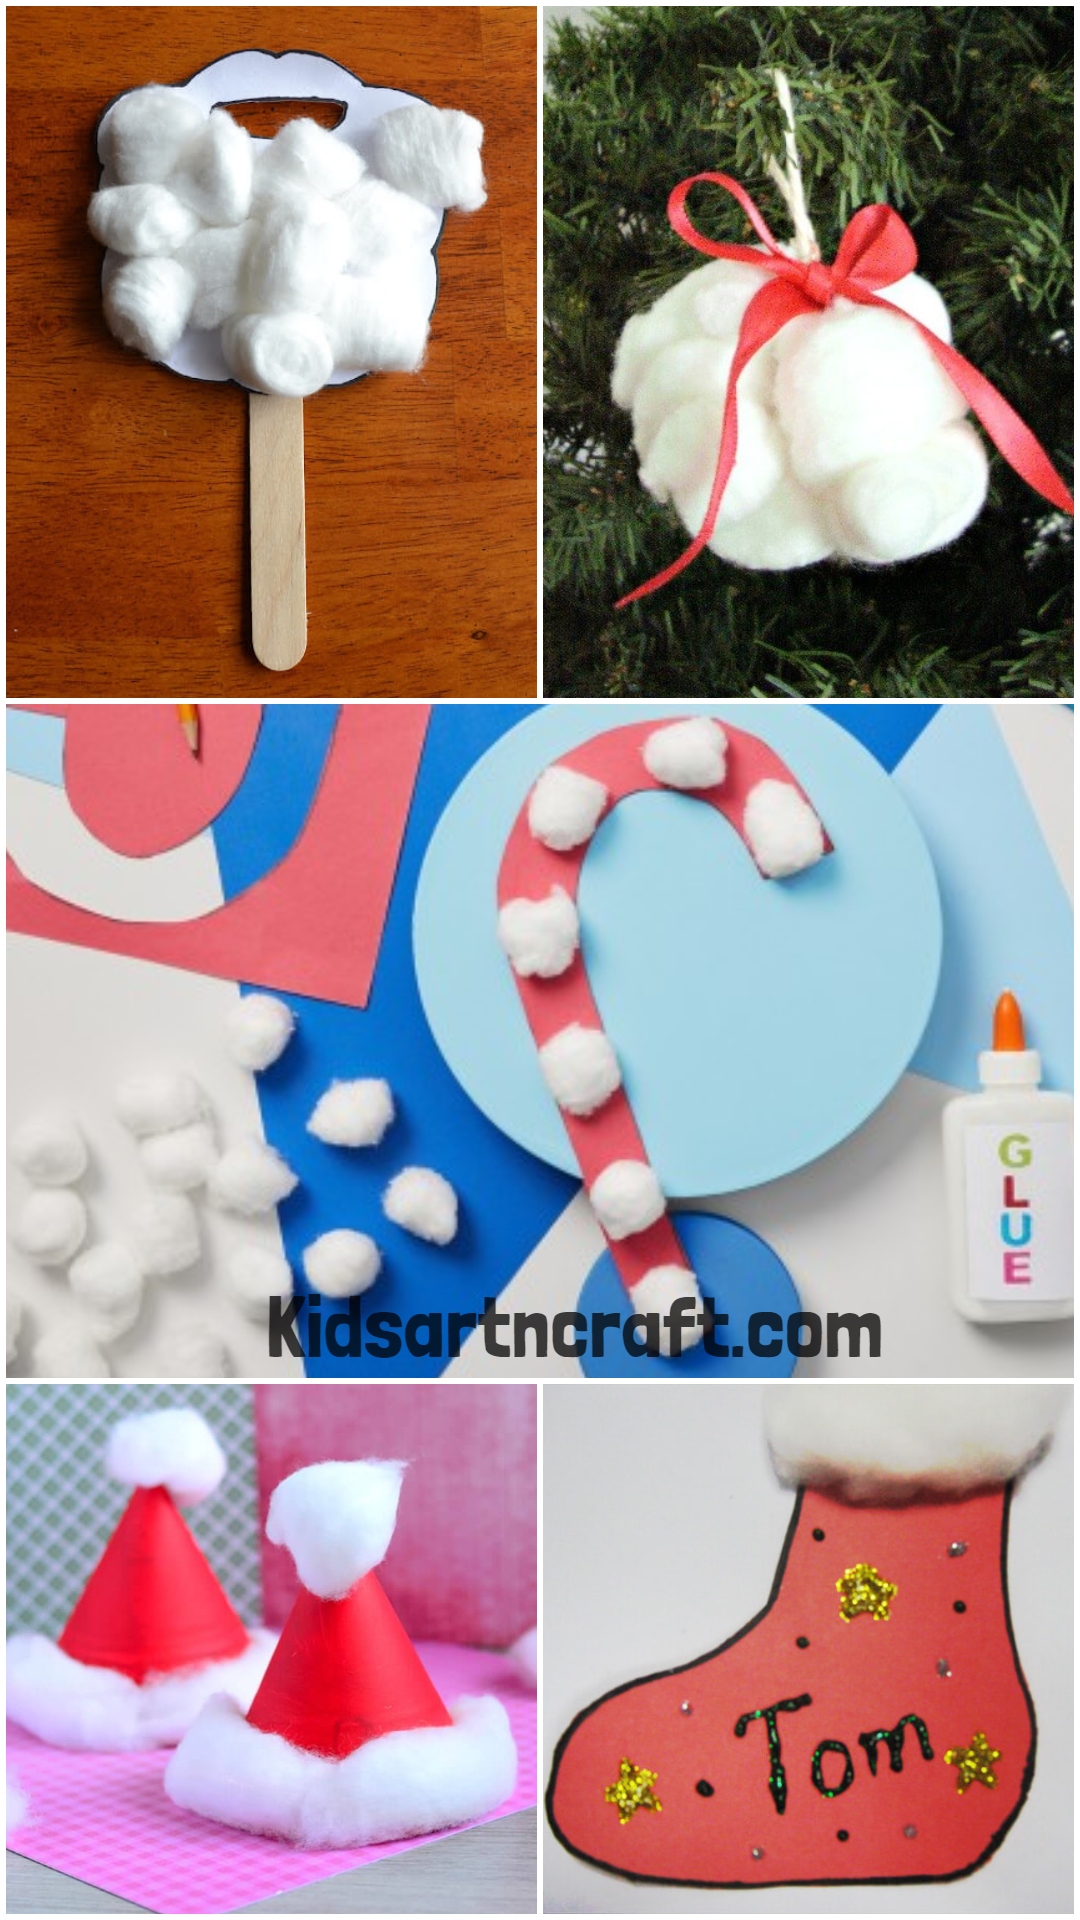 Christmas Cotton Crafts for Kids